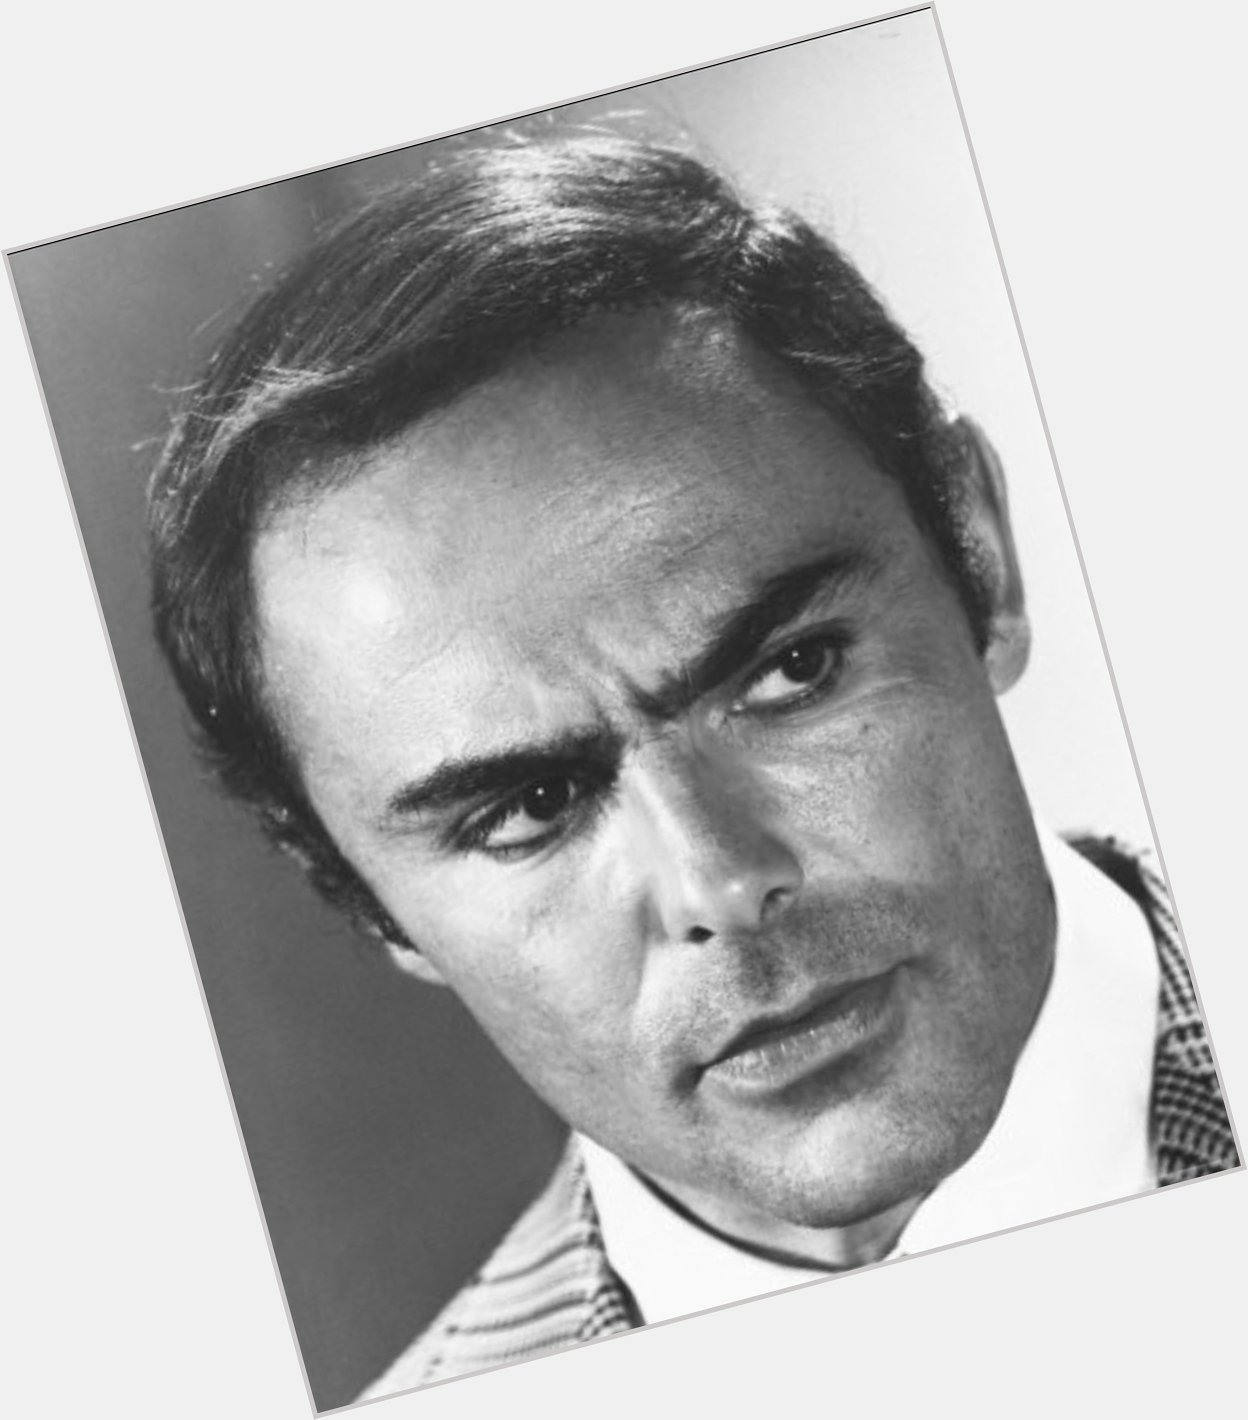 The Docs wanna wish a happy birthday to a man that took on Freddy Krueger AND Bruce Lee face to face, John Saxon. 